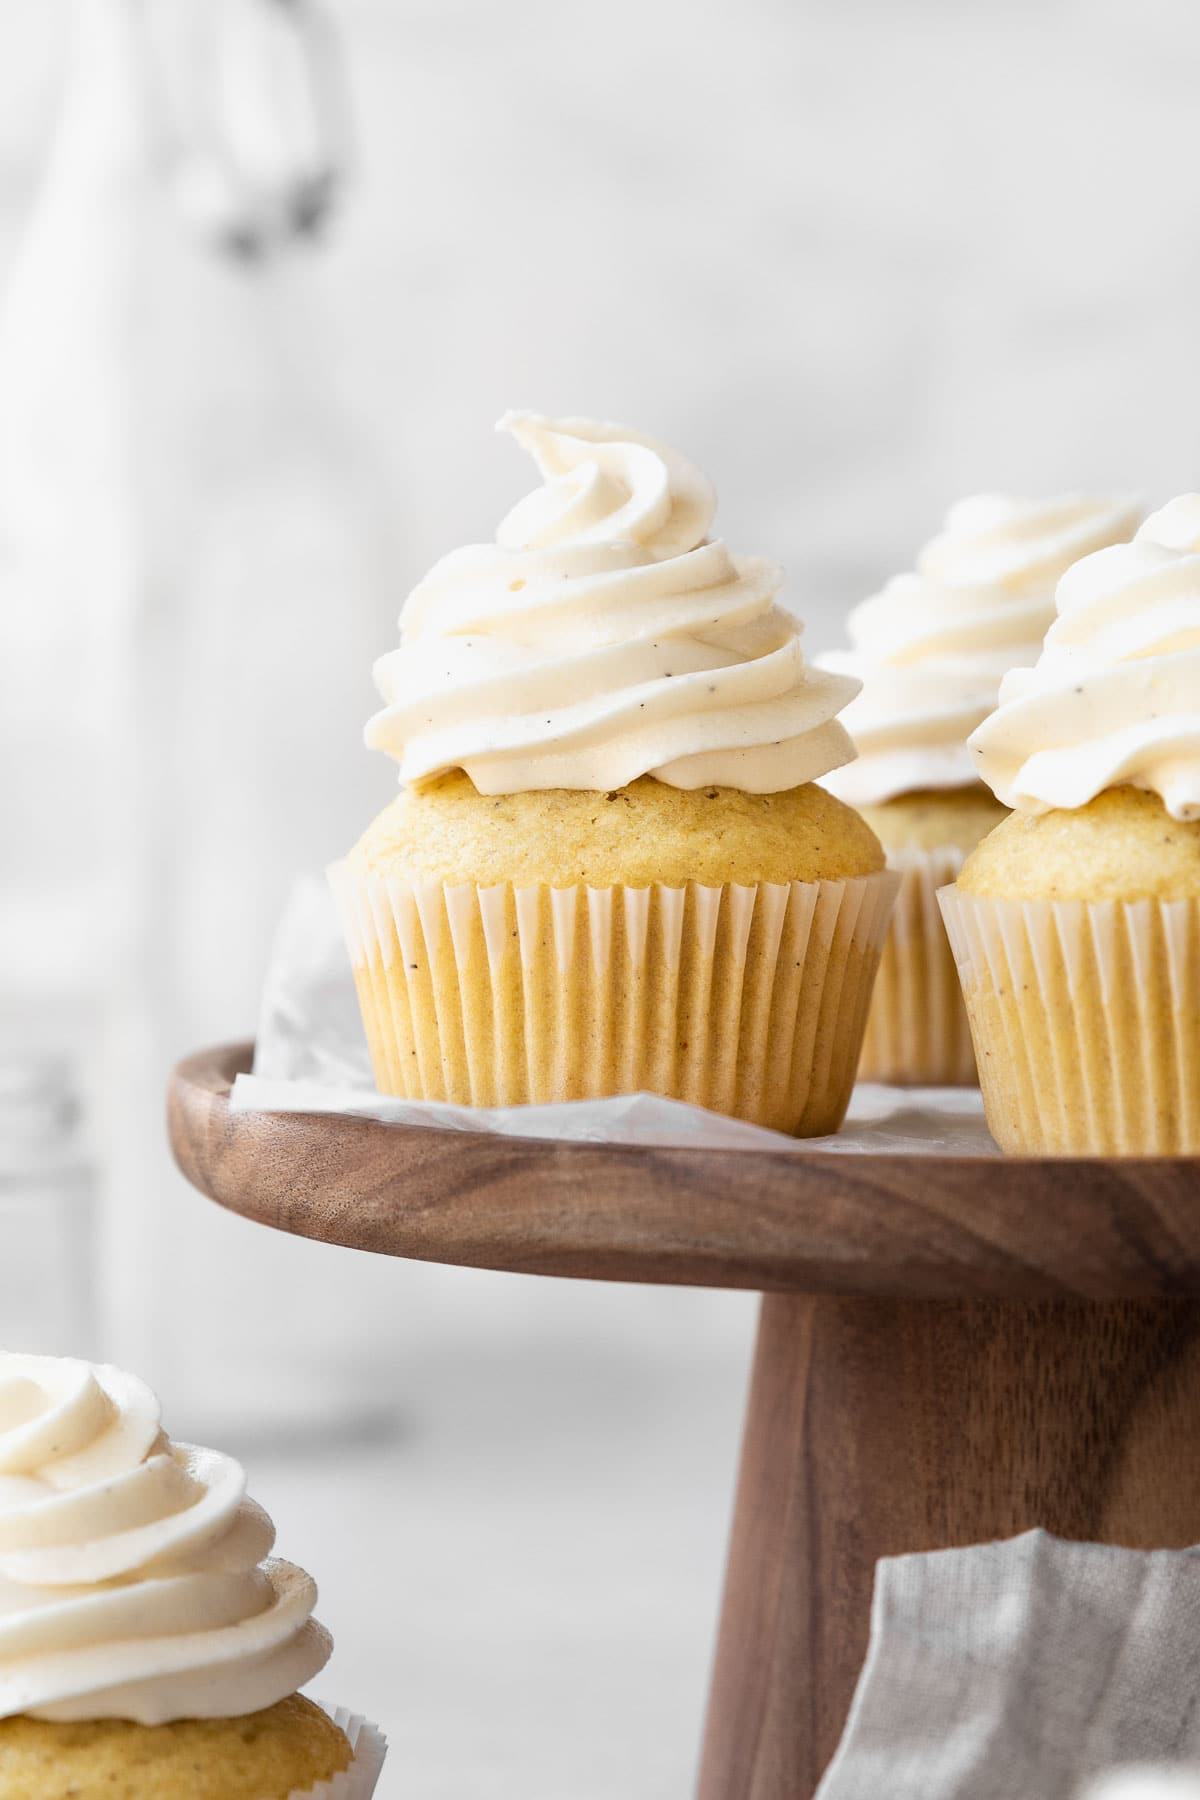 Dairy-free vanilla cupcakes on a wooden cake stand.